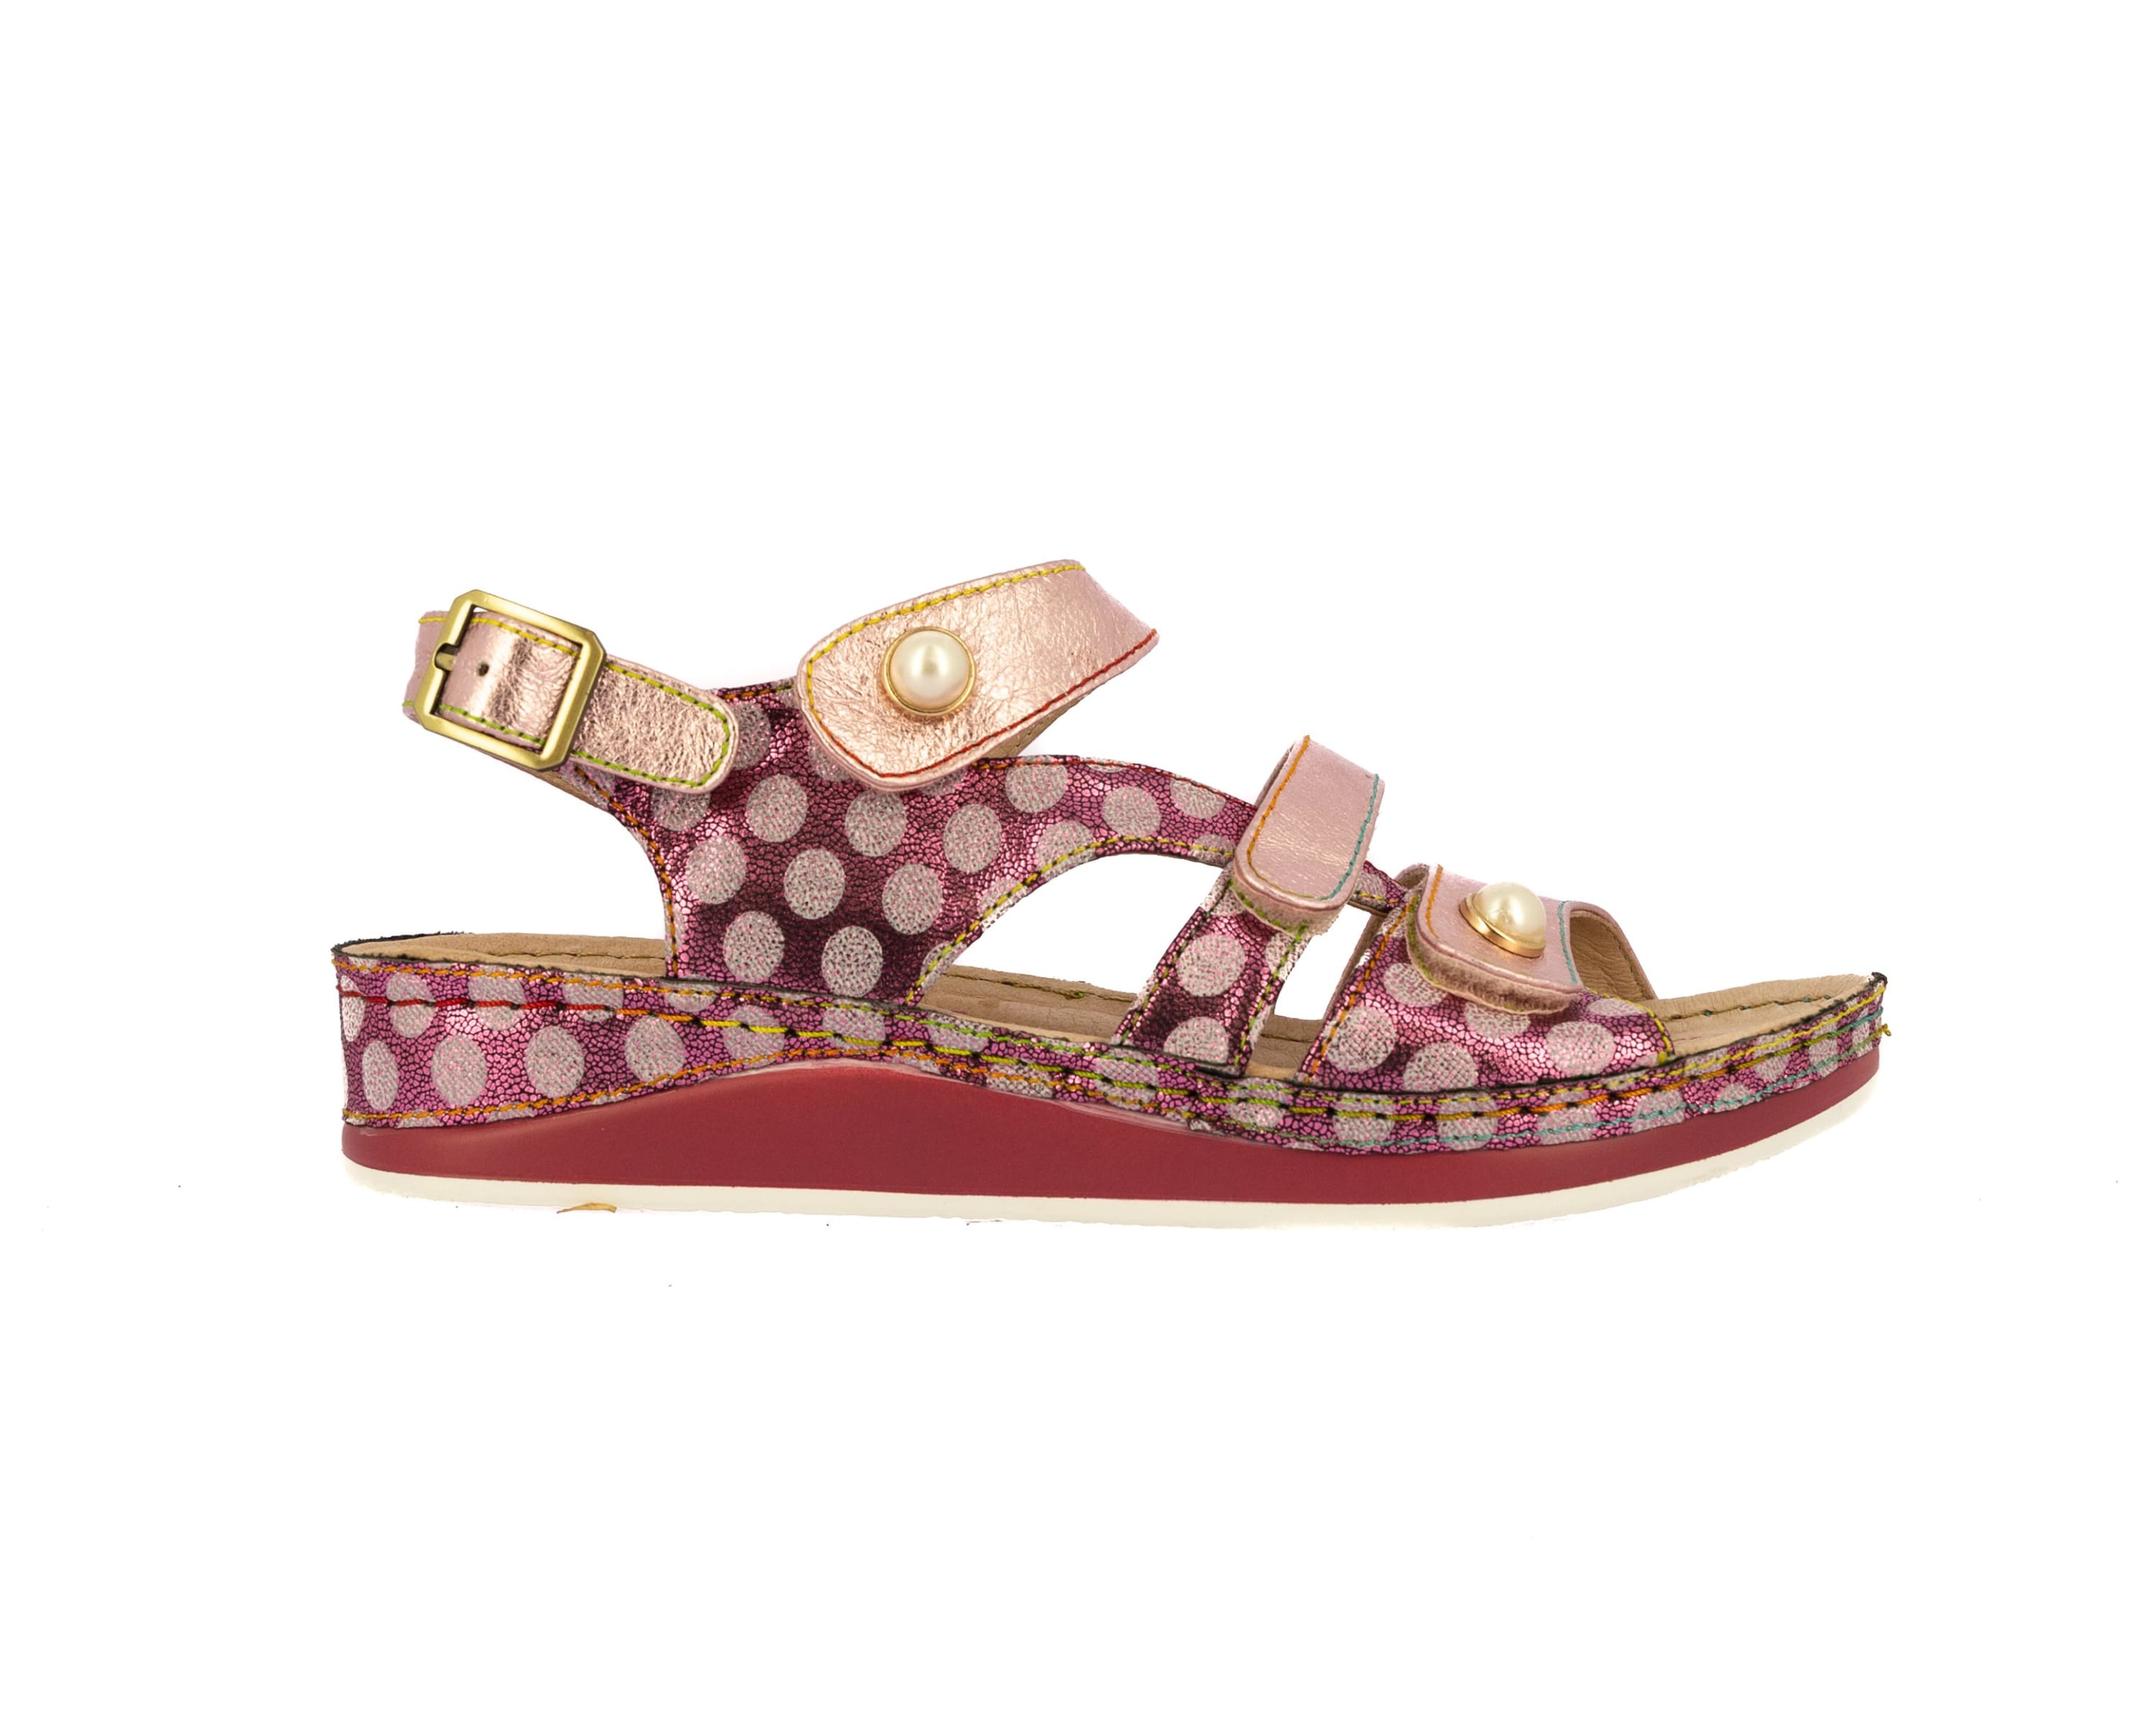 Chaussures BRCUELO 06 - 35 / PINK - Sandale